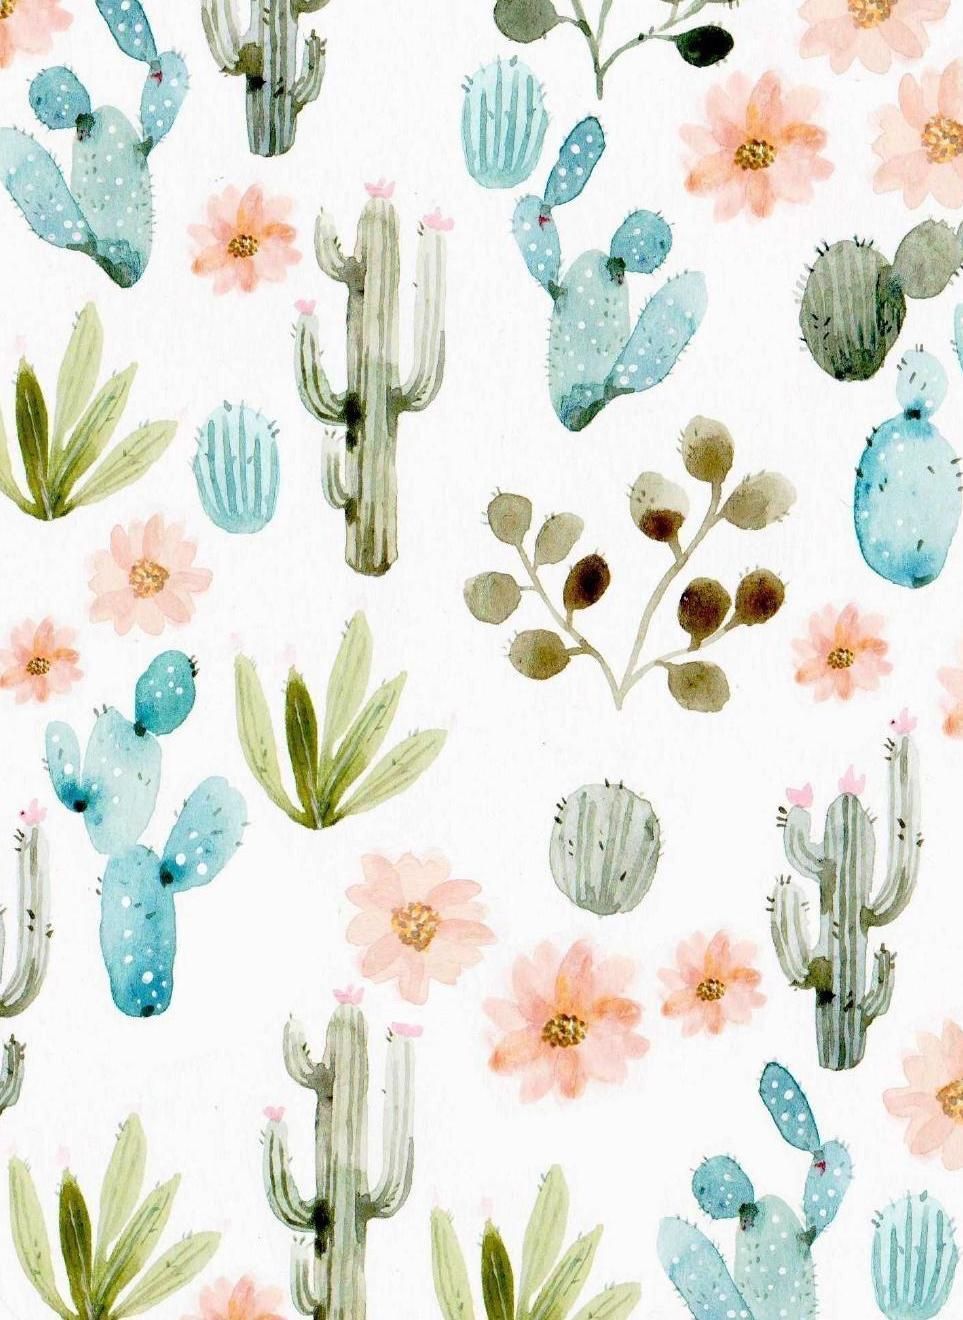 55 Hipster Watercolor Cactus Wallpapers - Watercolor Cactus Background - HD Wallpaper 